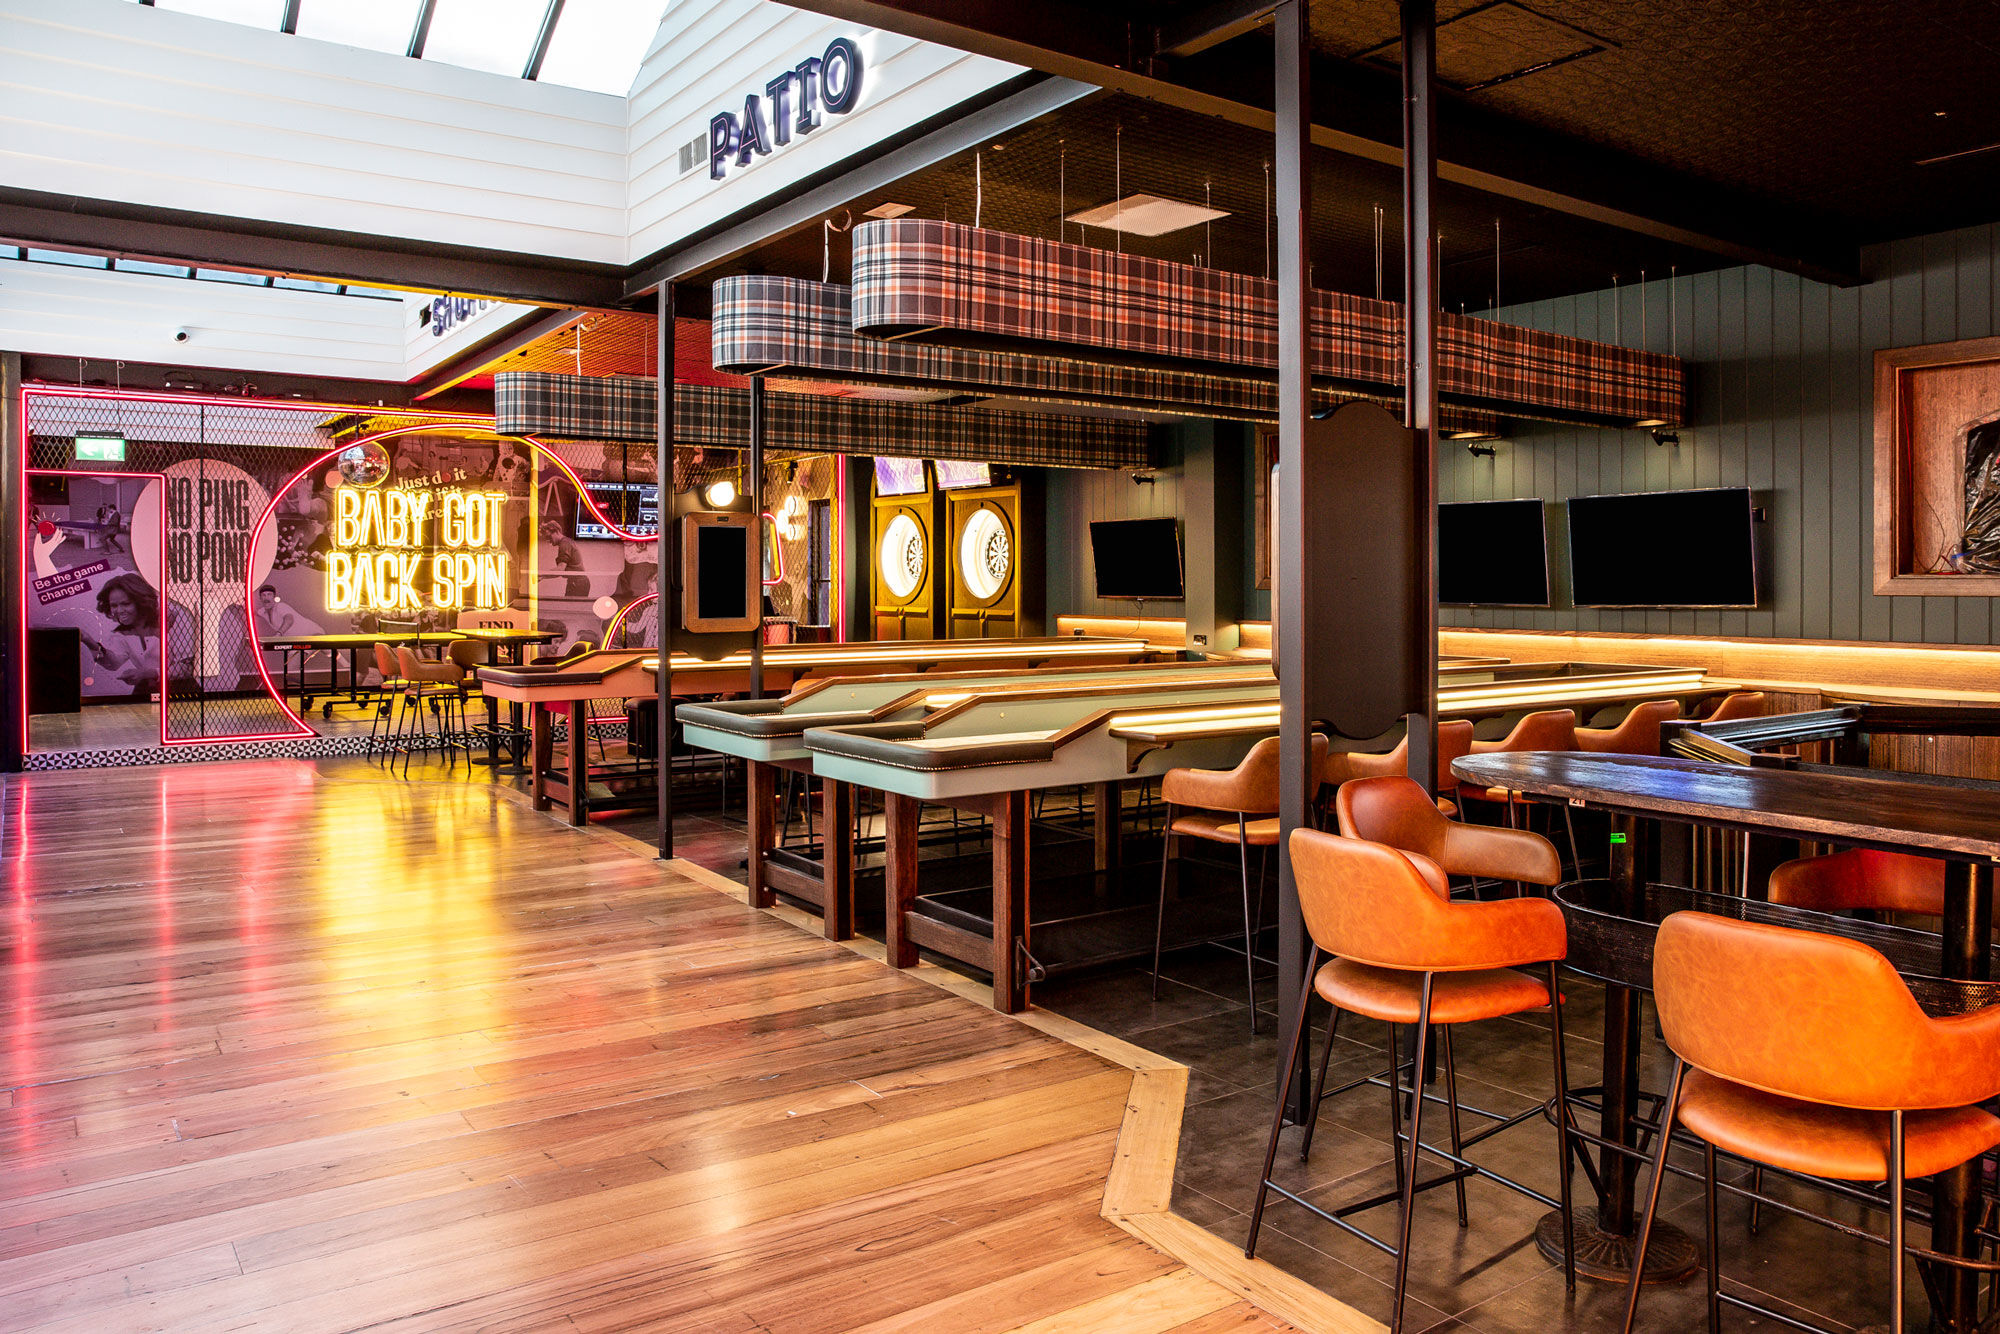 Private Rooms & Function Spaces for Birthdays, Corporate Bookings, Special Events with Ping Pong, Darts, Shuffleboard & Pool | Food & Drinks | Carlton, Melbourne